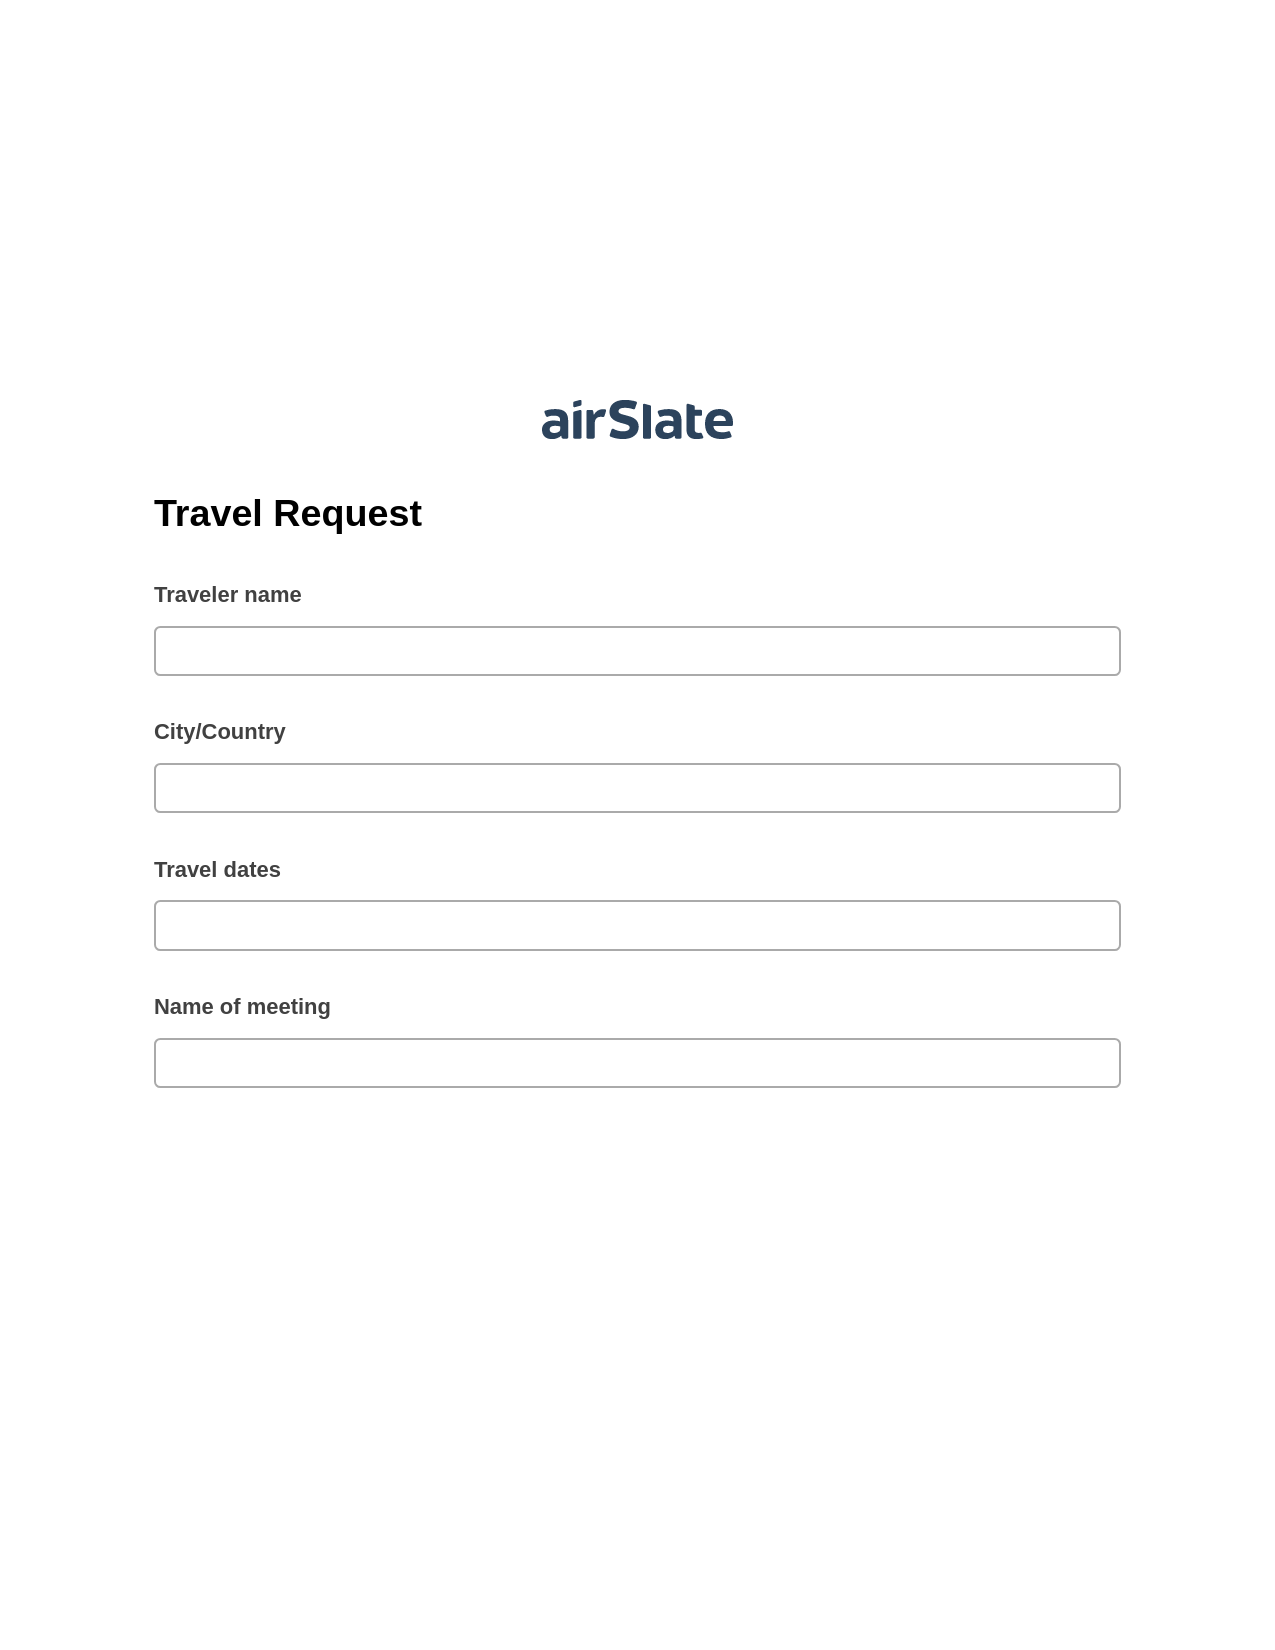 Travel Request Pre-fill Dropdown from Airtable, Create slate bot, Post-finish Document Bot